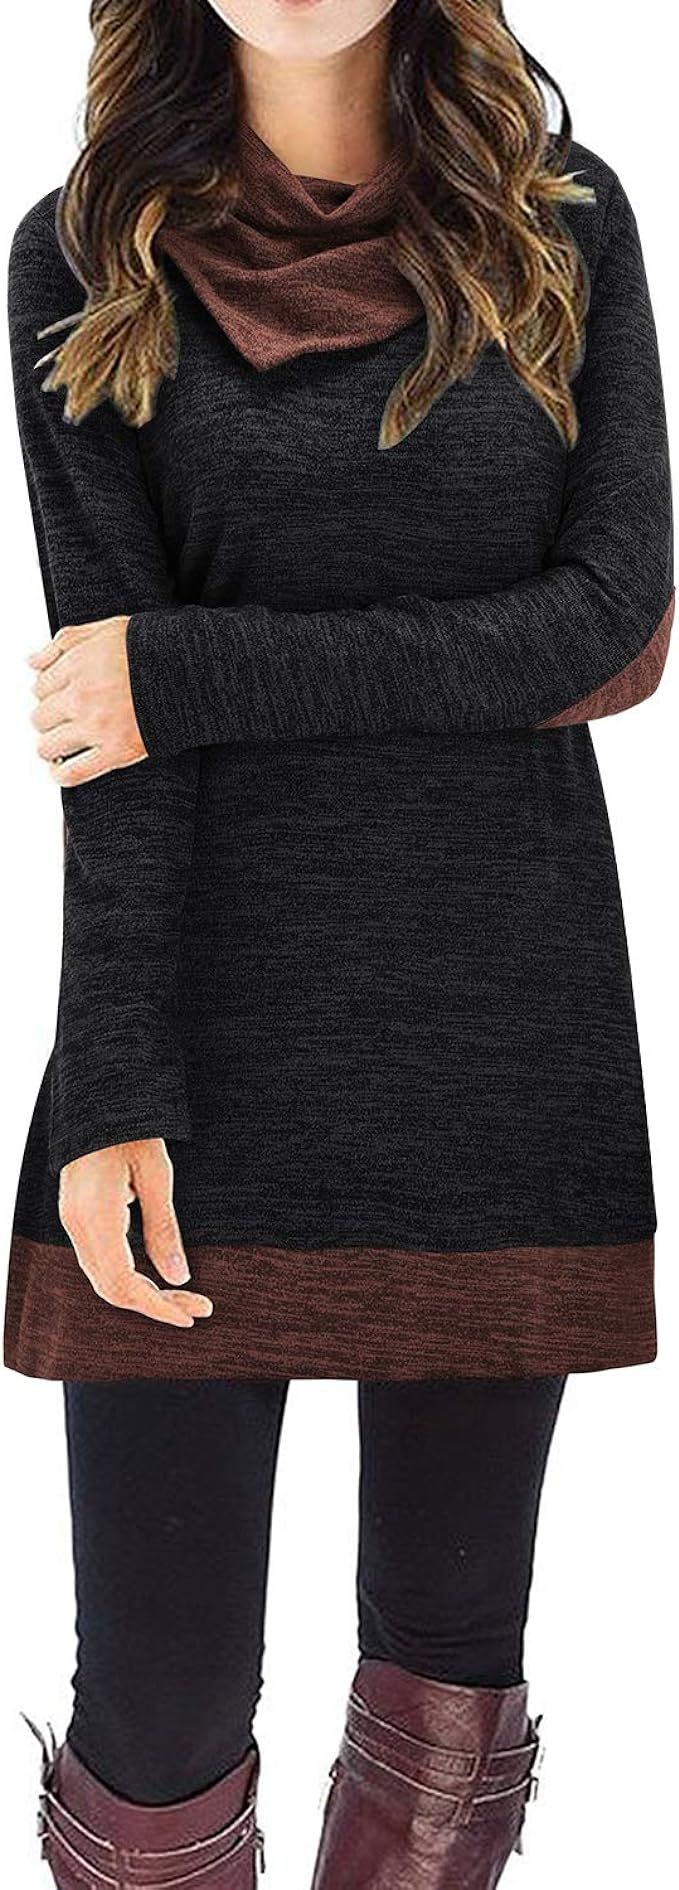 STYLEWORD Women's Cowl Neck Tunic Tops Long Sleeve Elbow Patchs Patchwork Casual Sweater Shirts | Amazon (US)